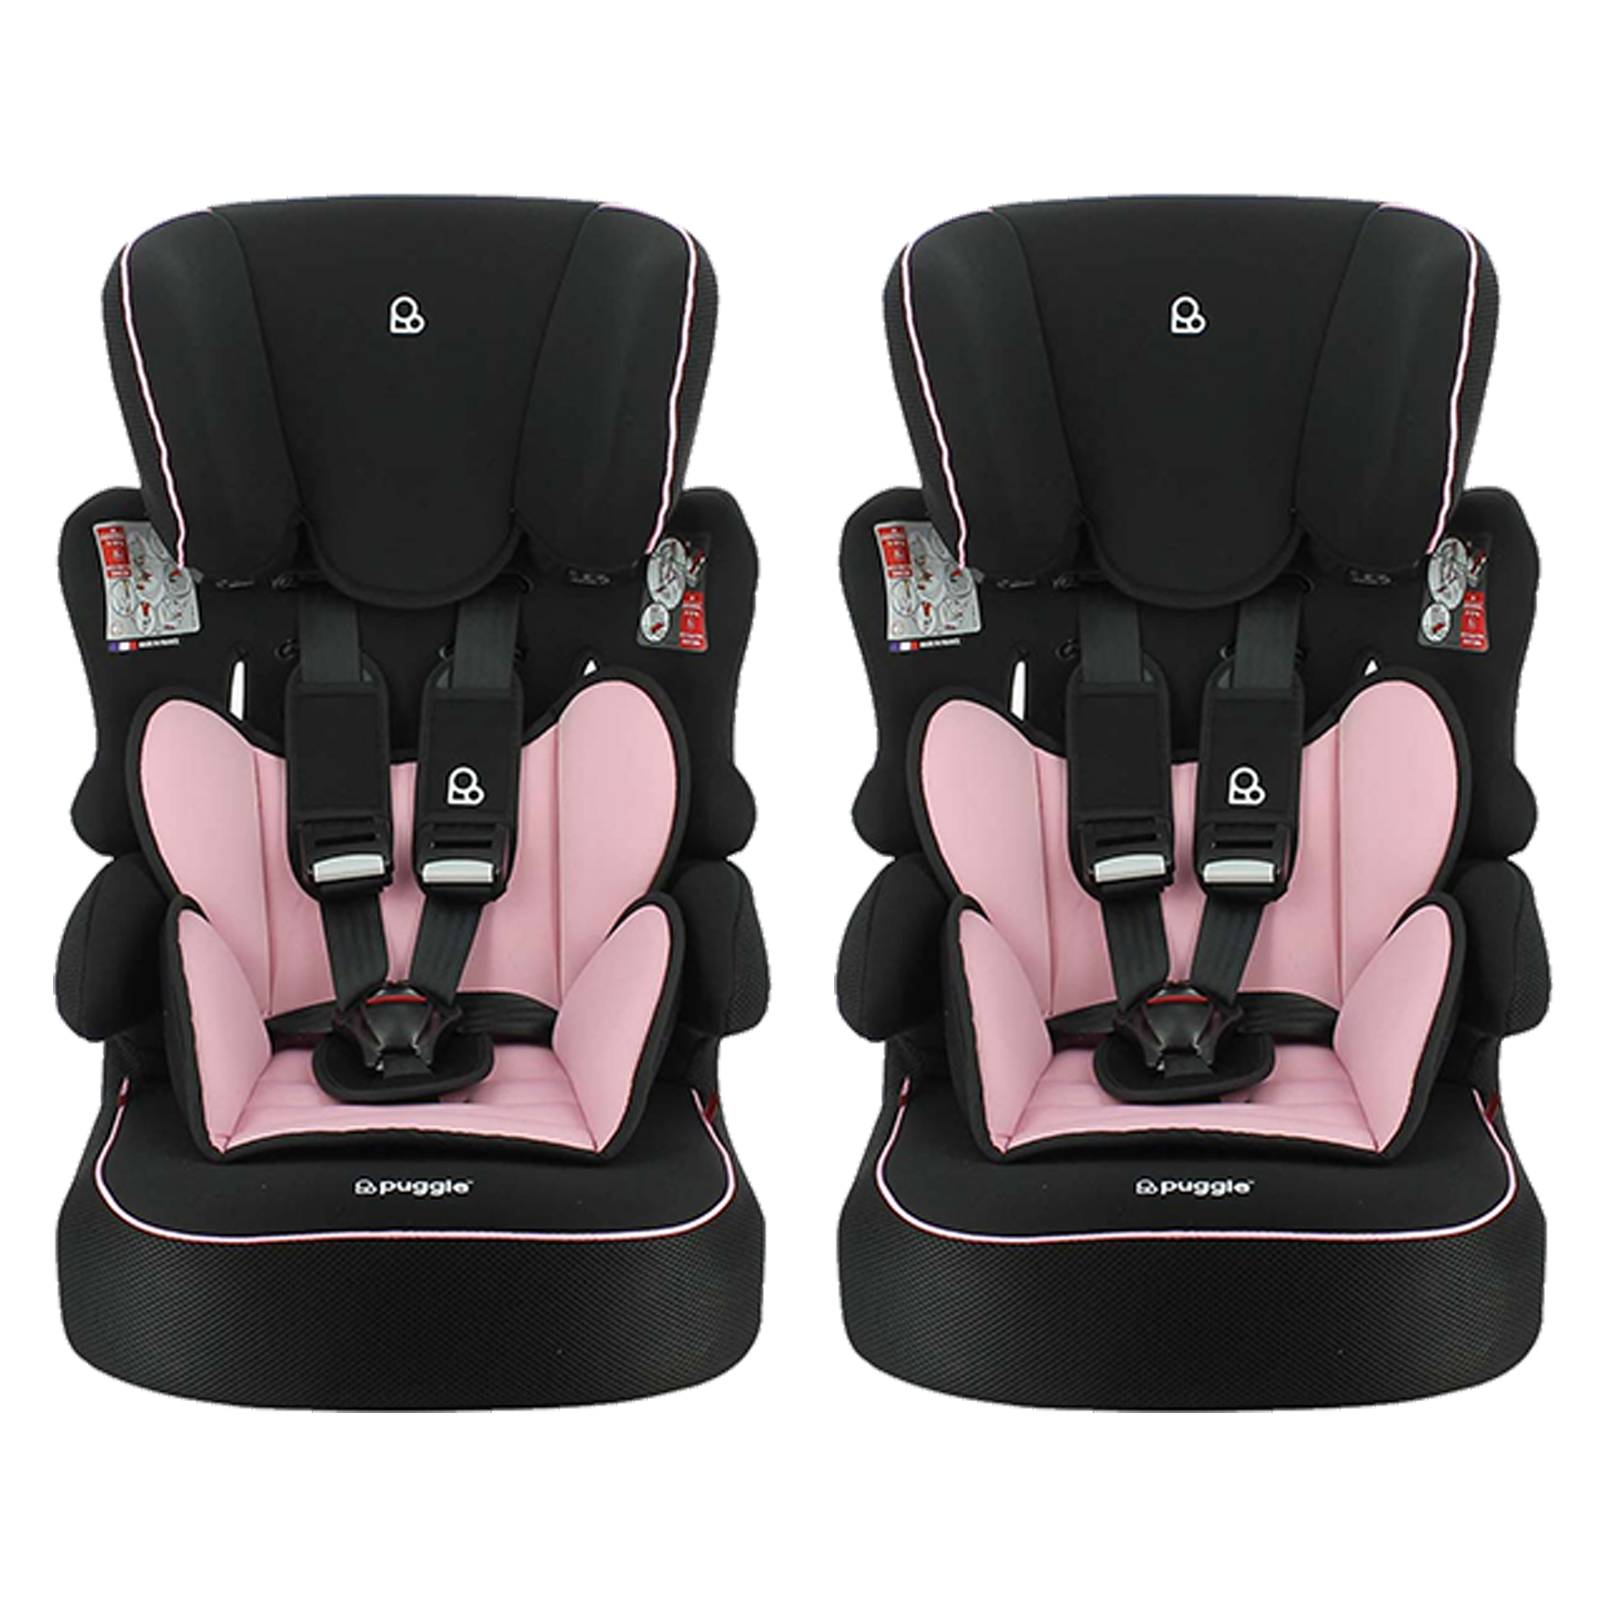 Puggle Linton Comfort Plus Luxe Grp 123 Car Seat - Blush Pink (2 Pack)